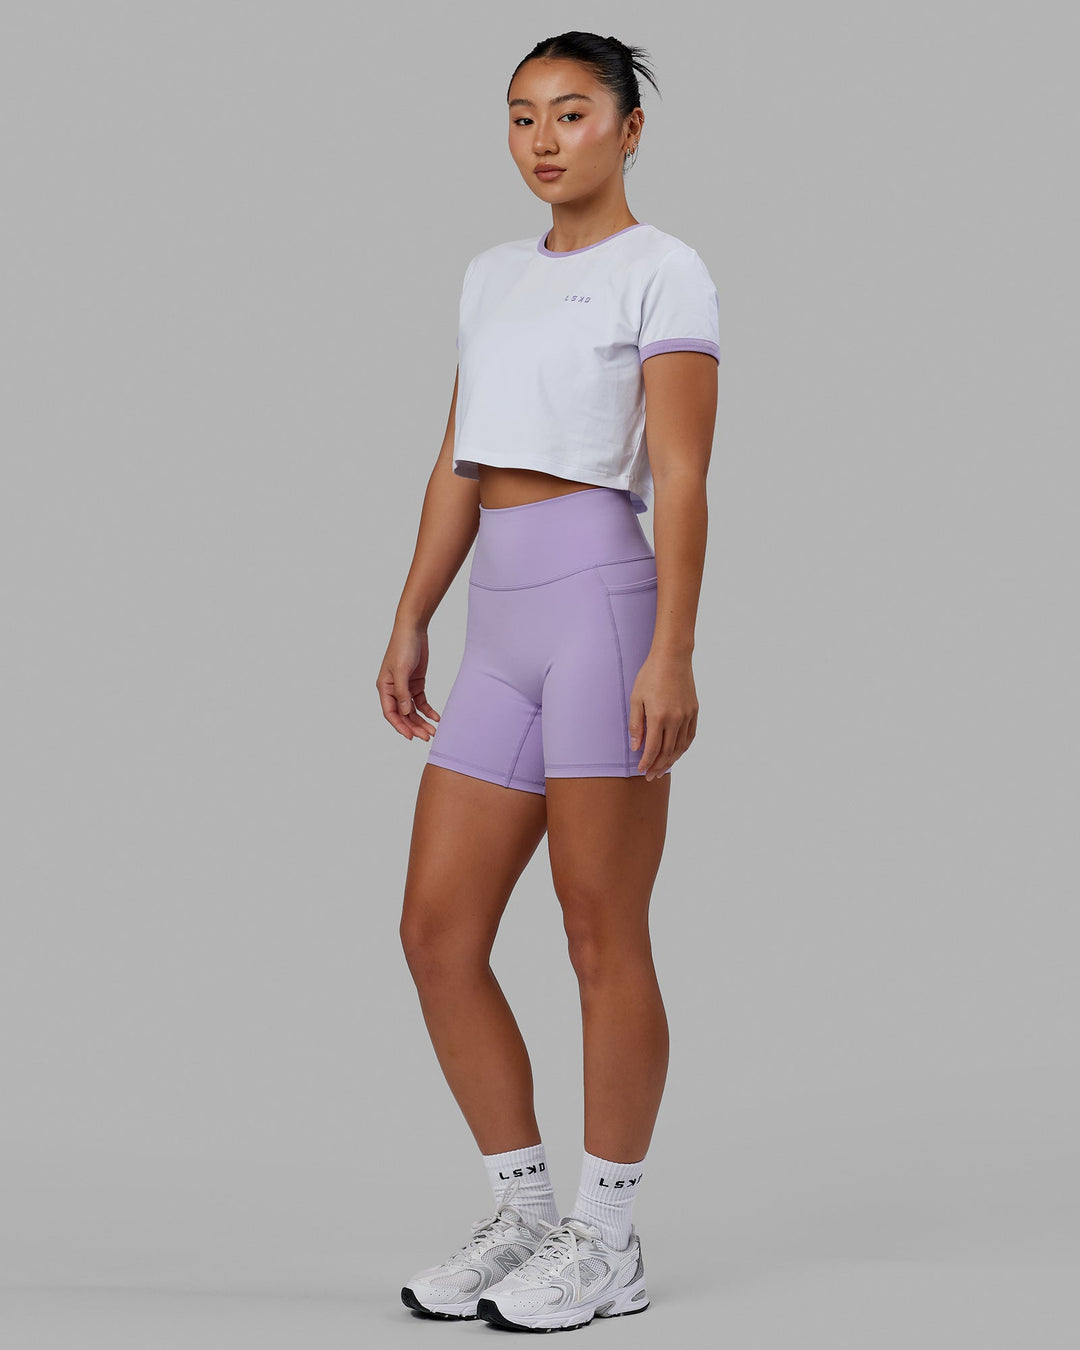 Excel Ringer Tee - White-Pale Lilac